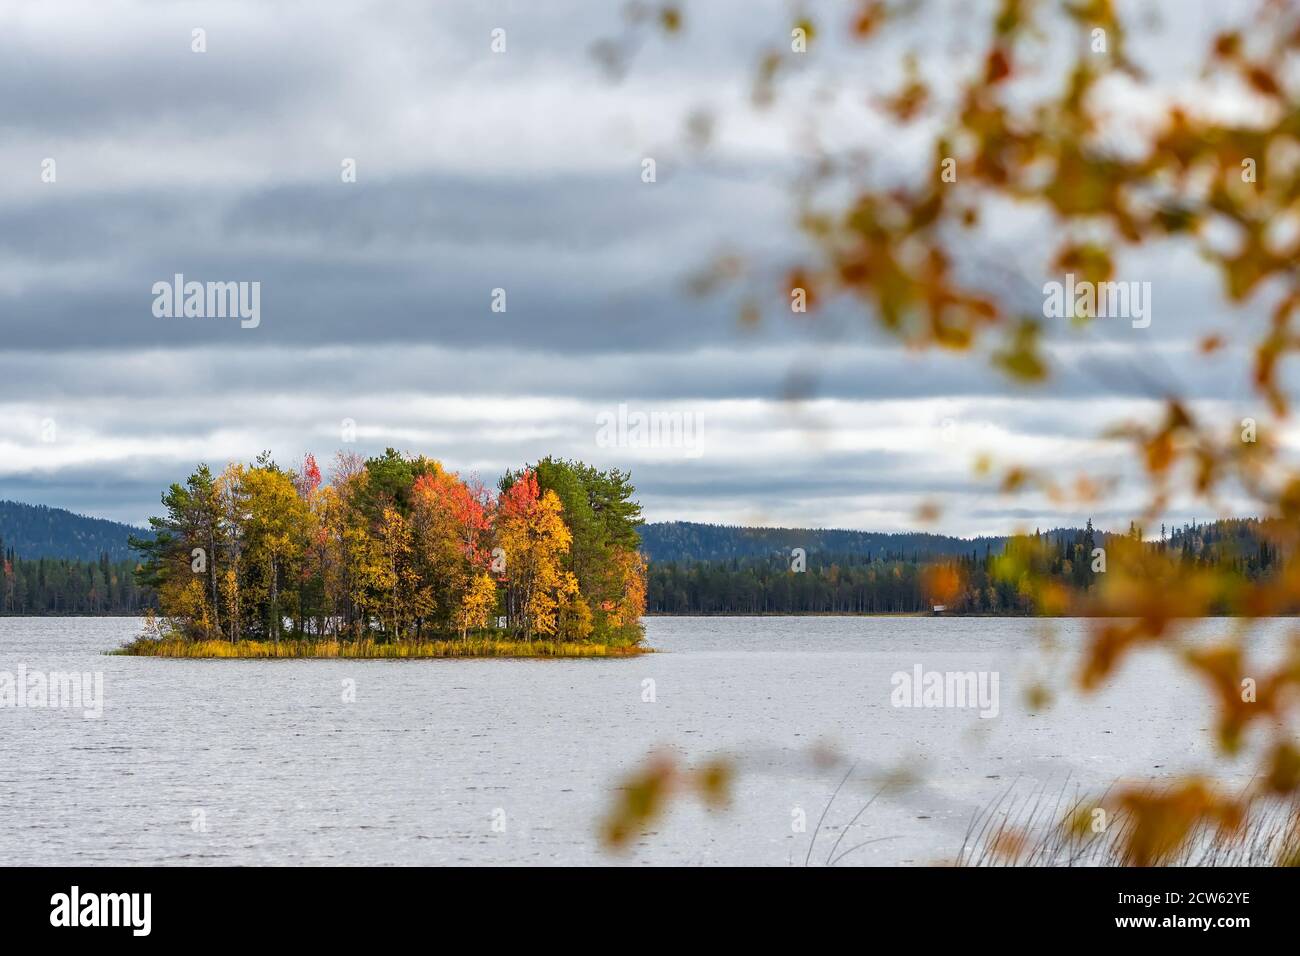 Beautiful autumn landscape with a small island on lake in Finland Stock Photo